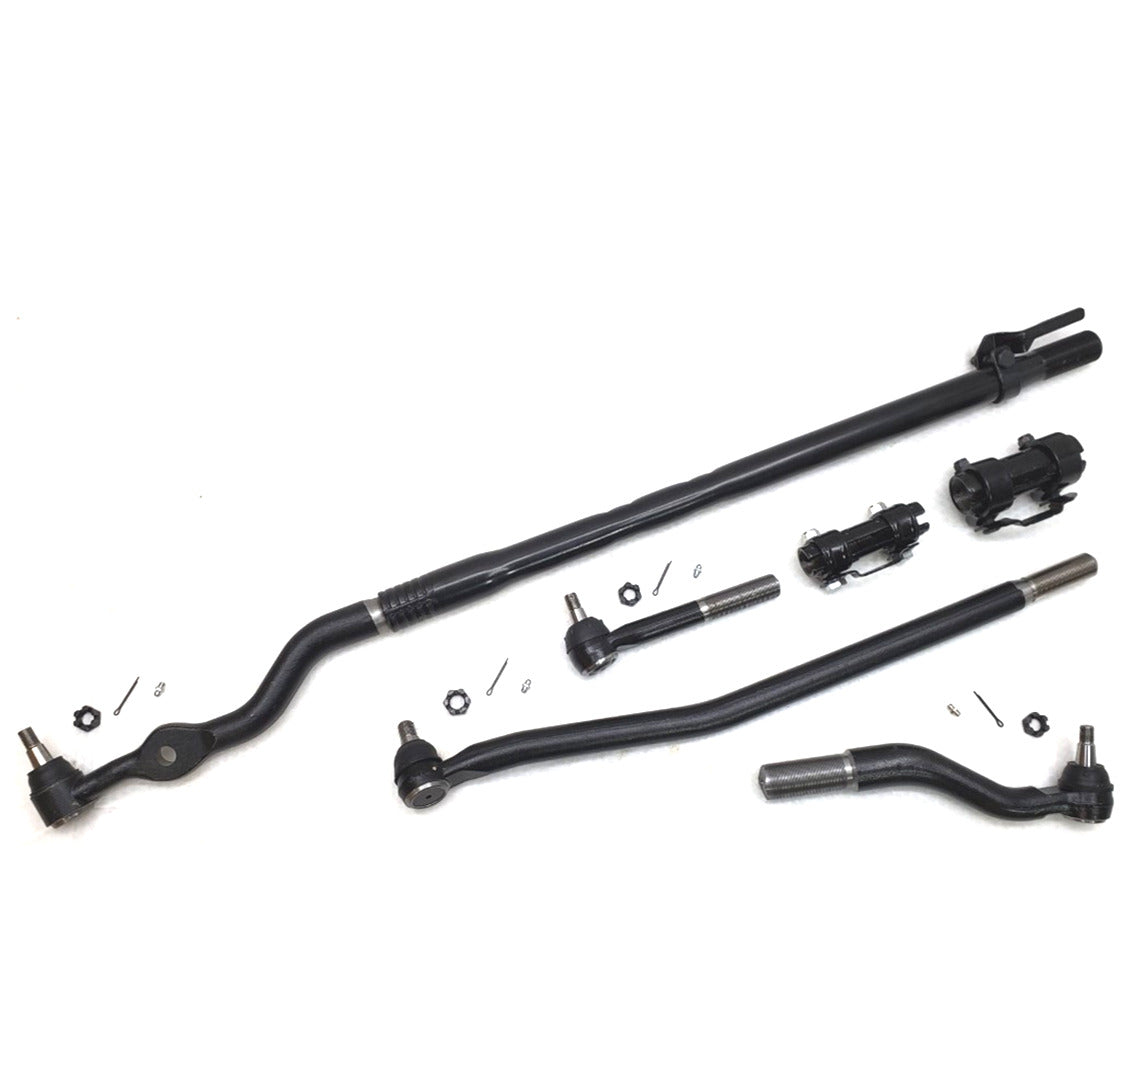 HD Drag Link Tie Rod Sleeve Kit for 1999-2004 Ford F250, F350, Excursion 4x4